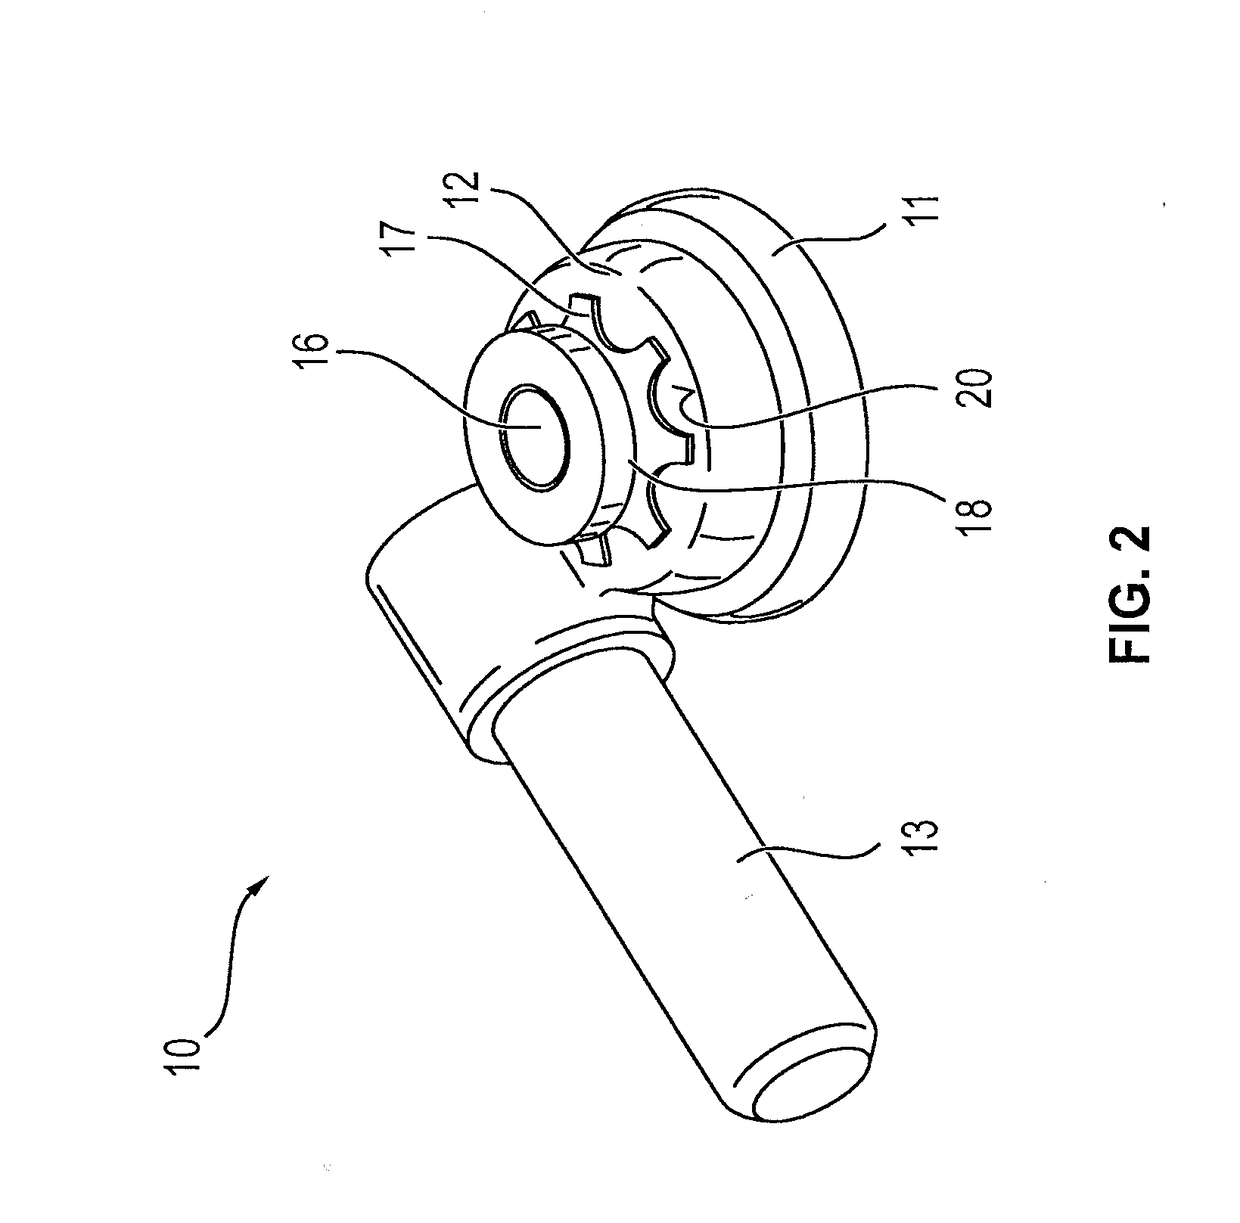 Exhaust-gas turbocharger